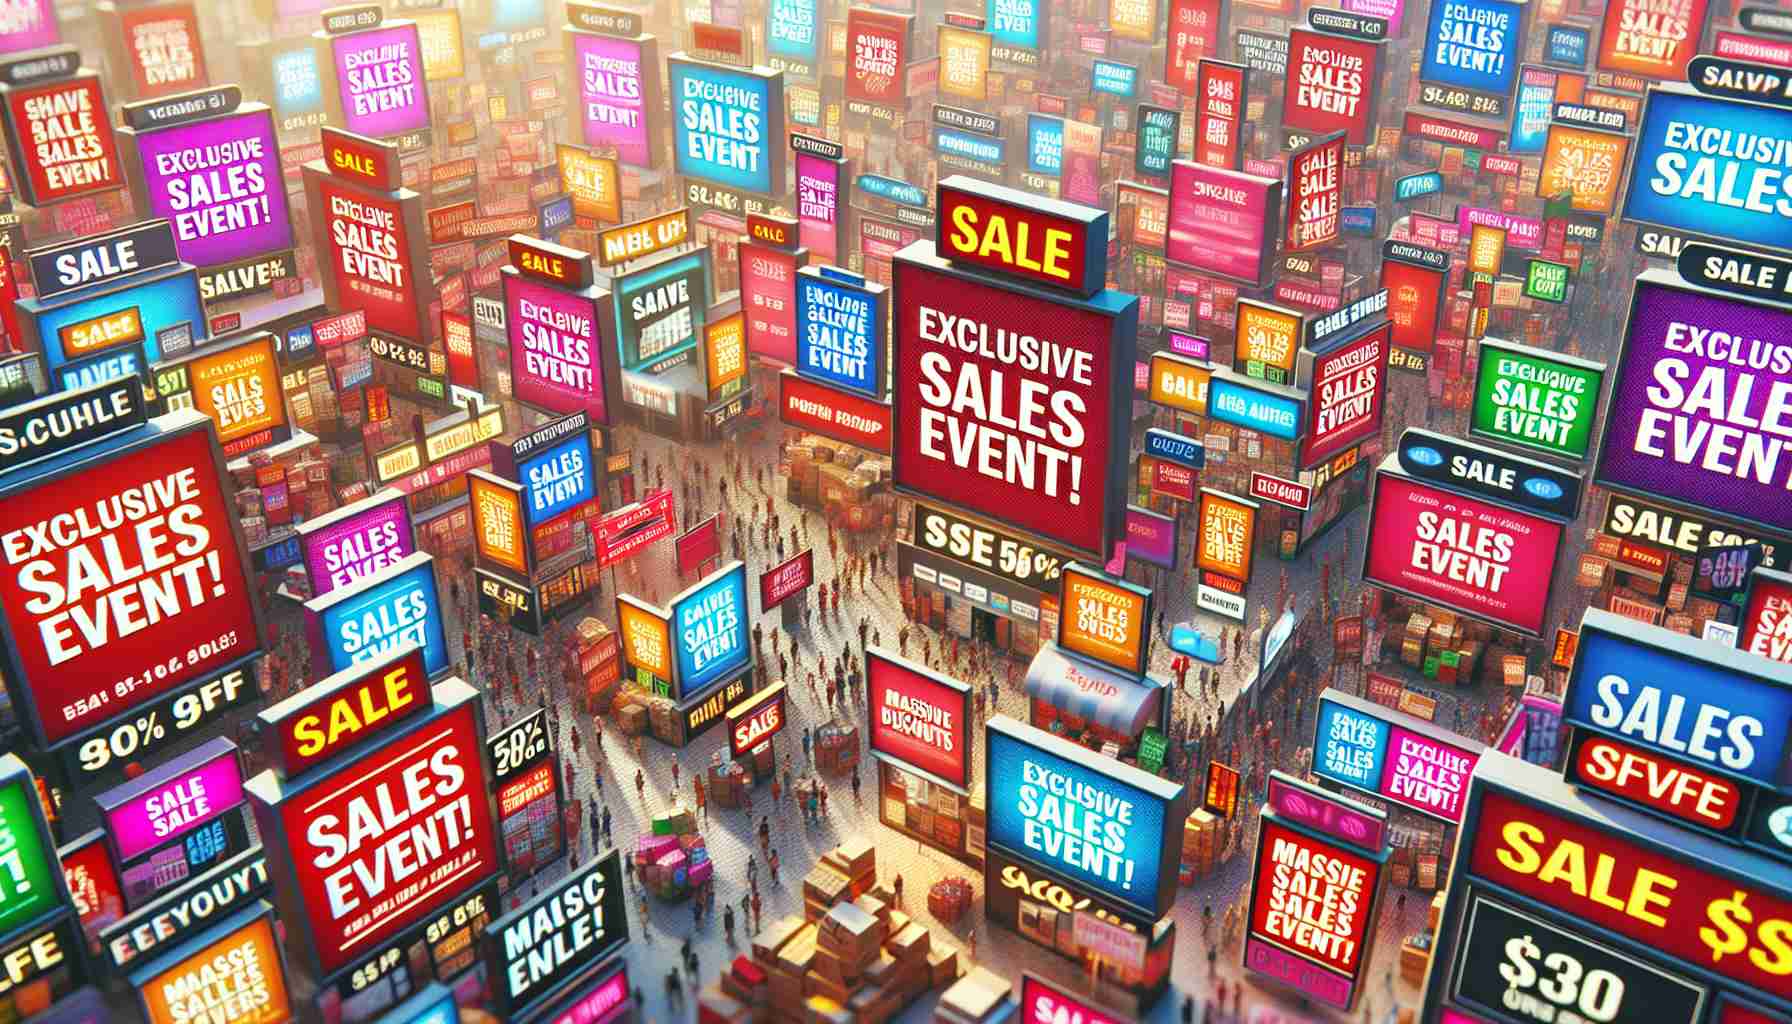 An image portraying an exciting sales event. It's packed with discounts and deals that are causing a buzz. The atmosphere is vibrant with a sense of anticipation. Numerous signs of various shapes and sizes advertise the sales, each one popping with bold colors and catchy phrases like 'Exclusive Sales Event!' and 'Massive Discounts!. The image is in High Definition to capture every detail, from the sales tags to the excited expressions on the customers' faces.